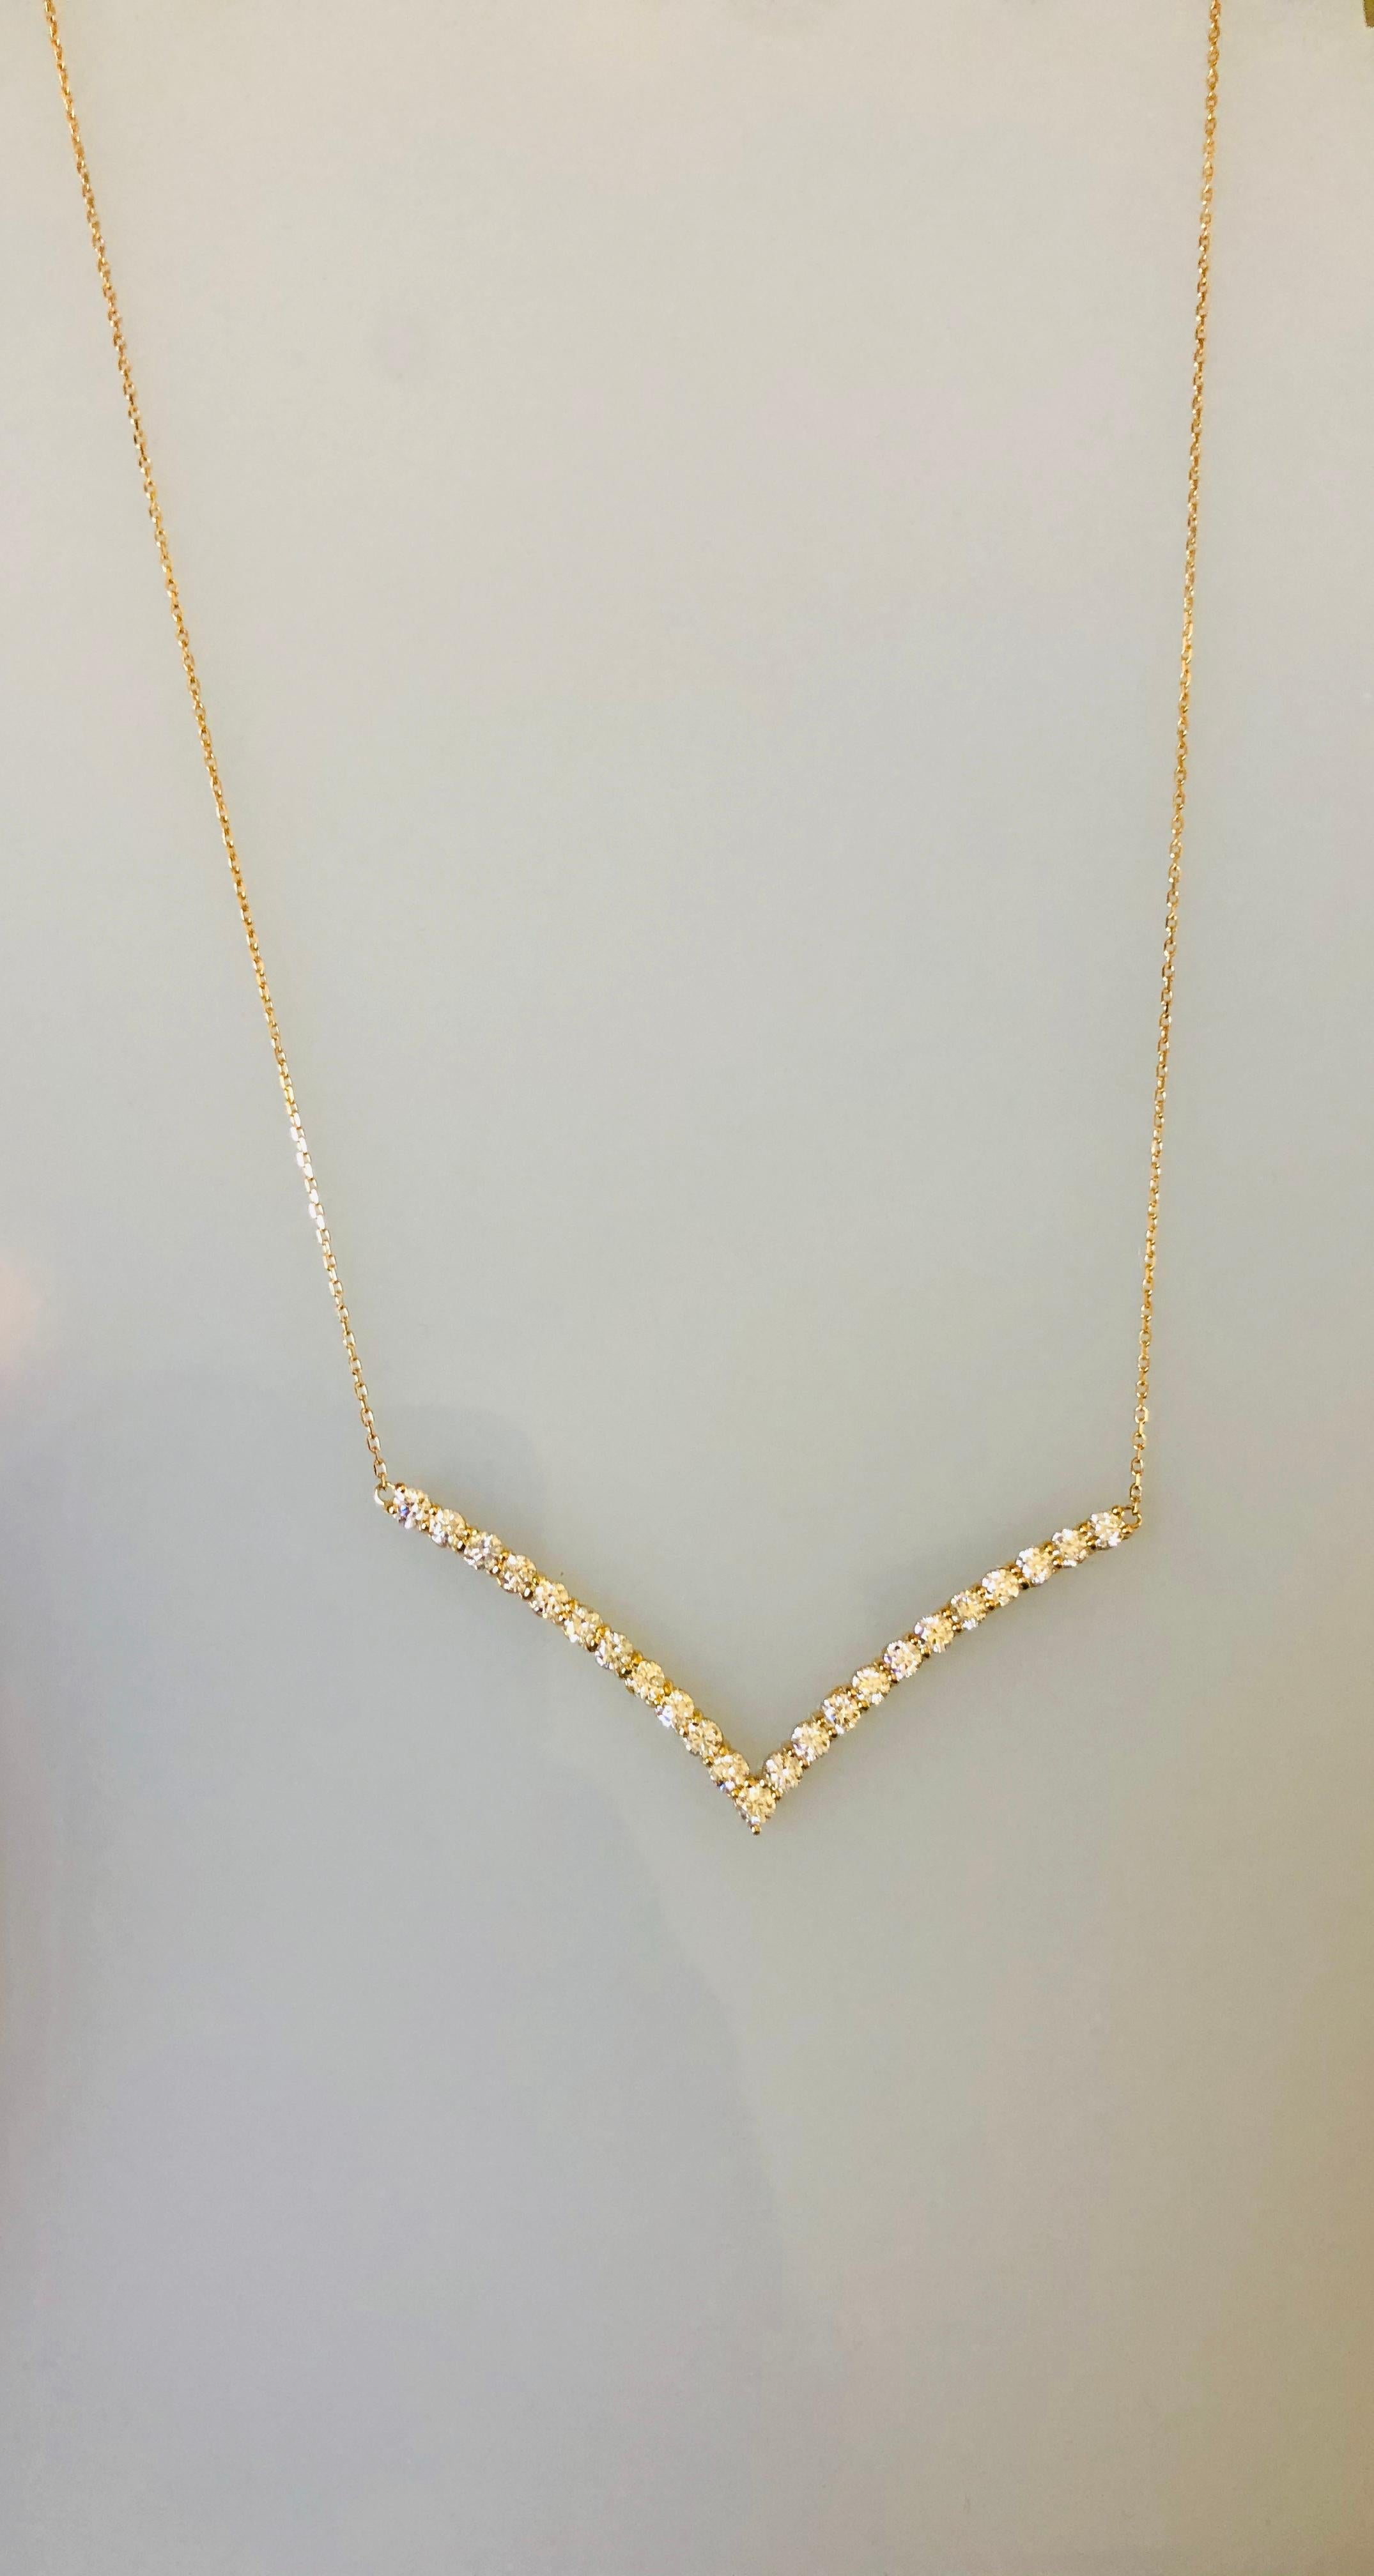 2.09 Carat Diamond Yellow Gold Chain Necklace In New Condition For Sale In Los Angeles, CA